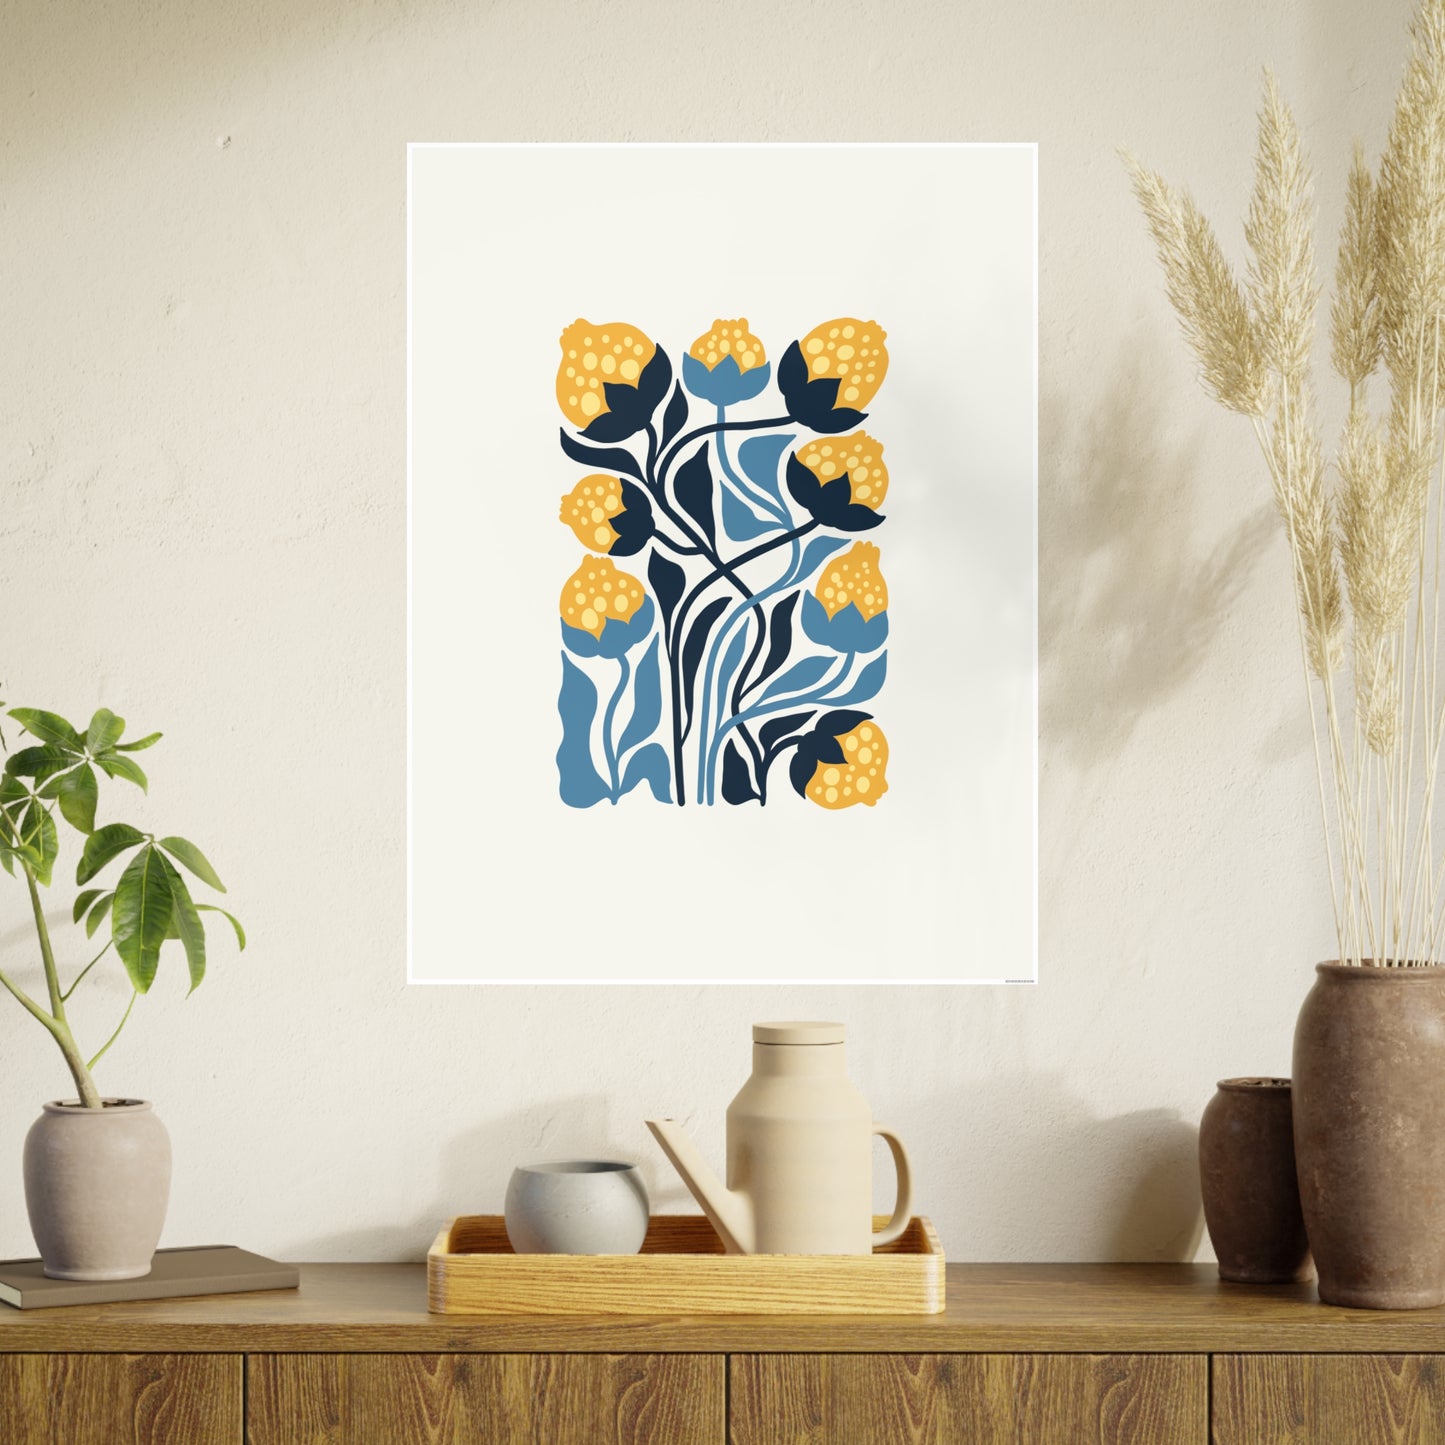 Dancing Cotton Blossoms Wall Posters